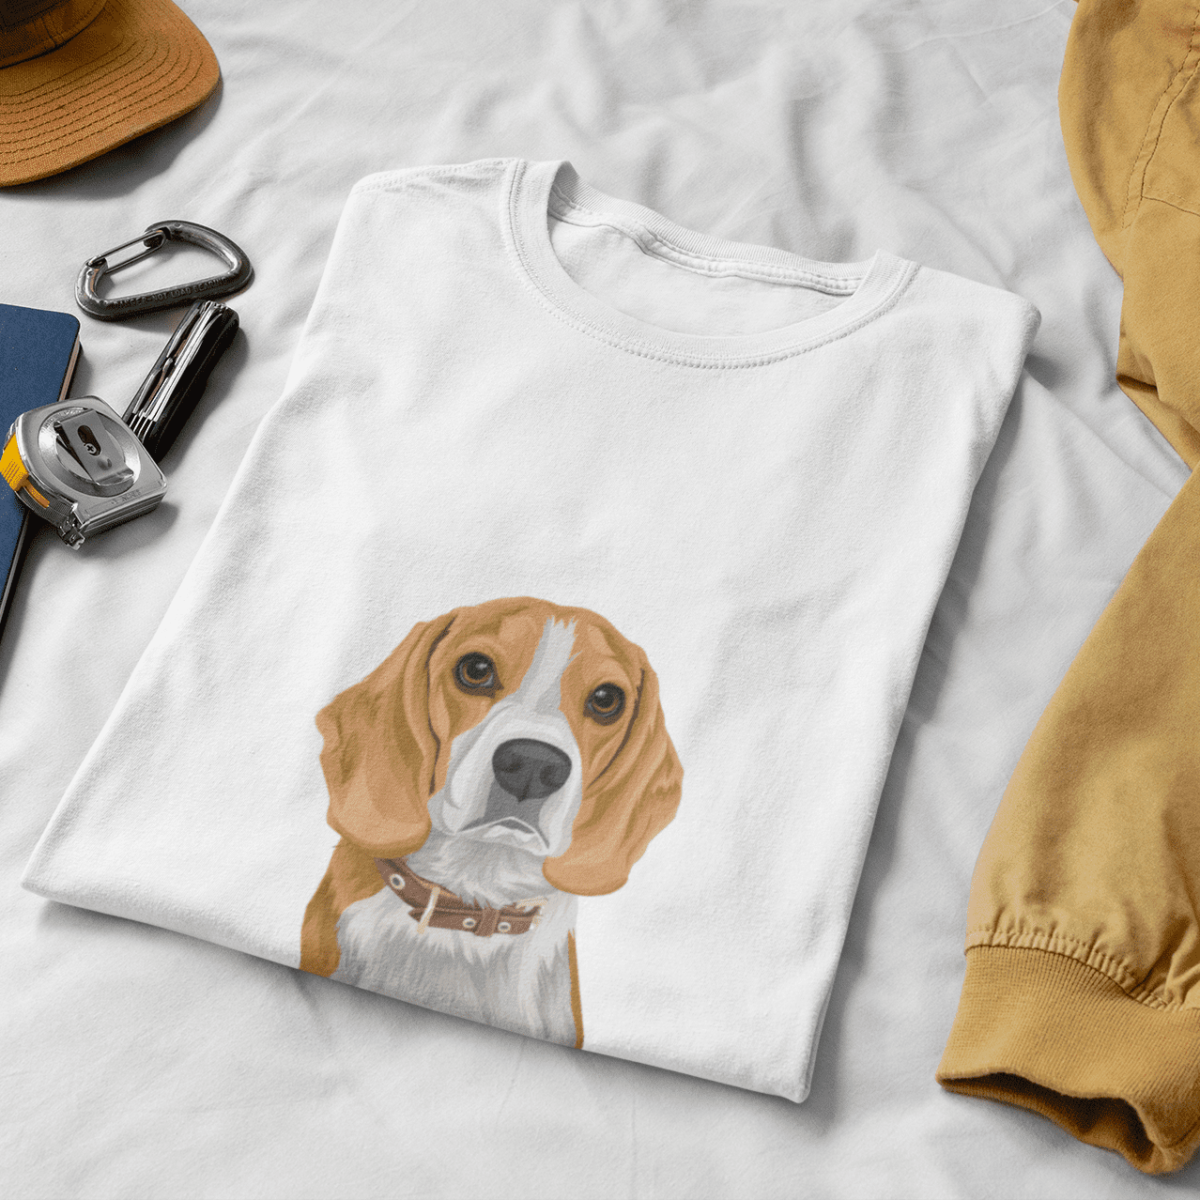 mockup of a folded t shirt on a bed with some working tools 33921 1